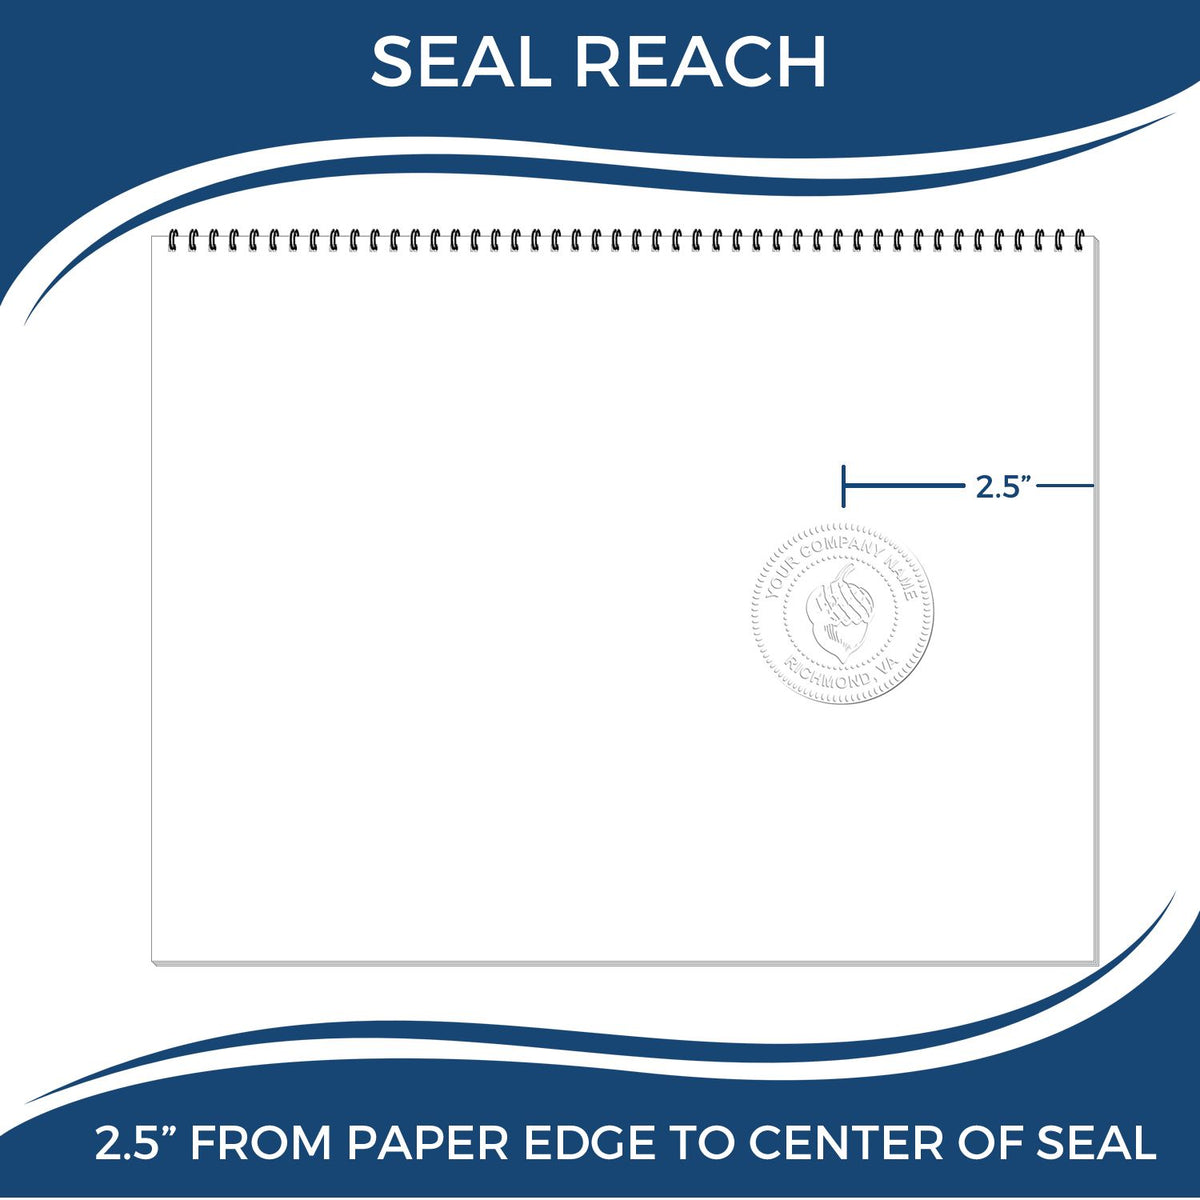 An infographic showing the seal reach which is represented by a ruler and a miniature seal image of the Heavy Duty Cast Iron Tennessee Geologist Seal Embosser